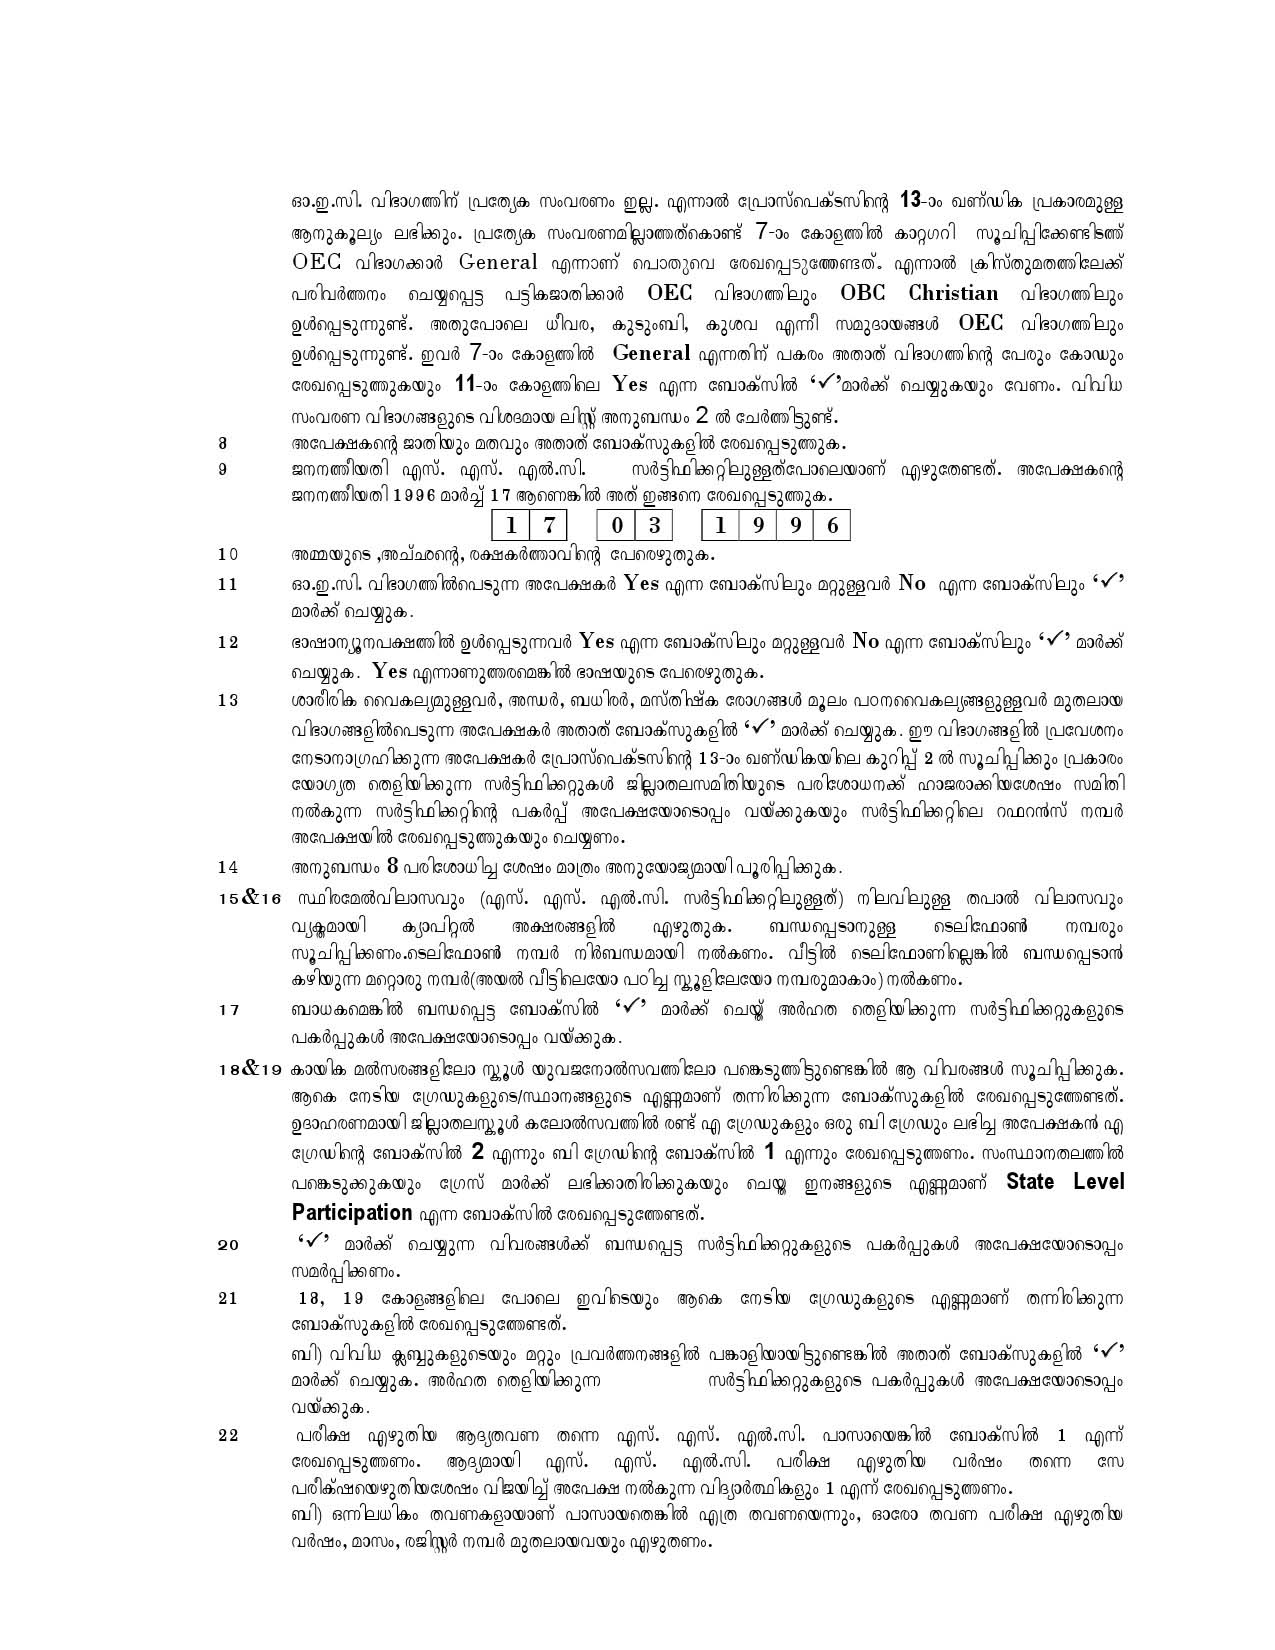 How to Fill Kerala Plus 1 Application Form - Notification Image 2